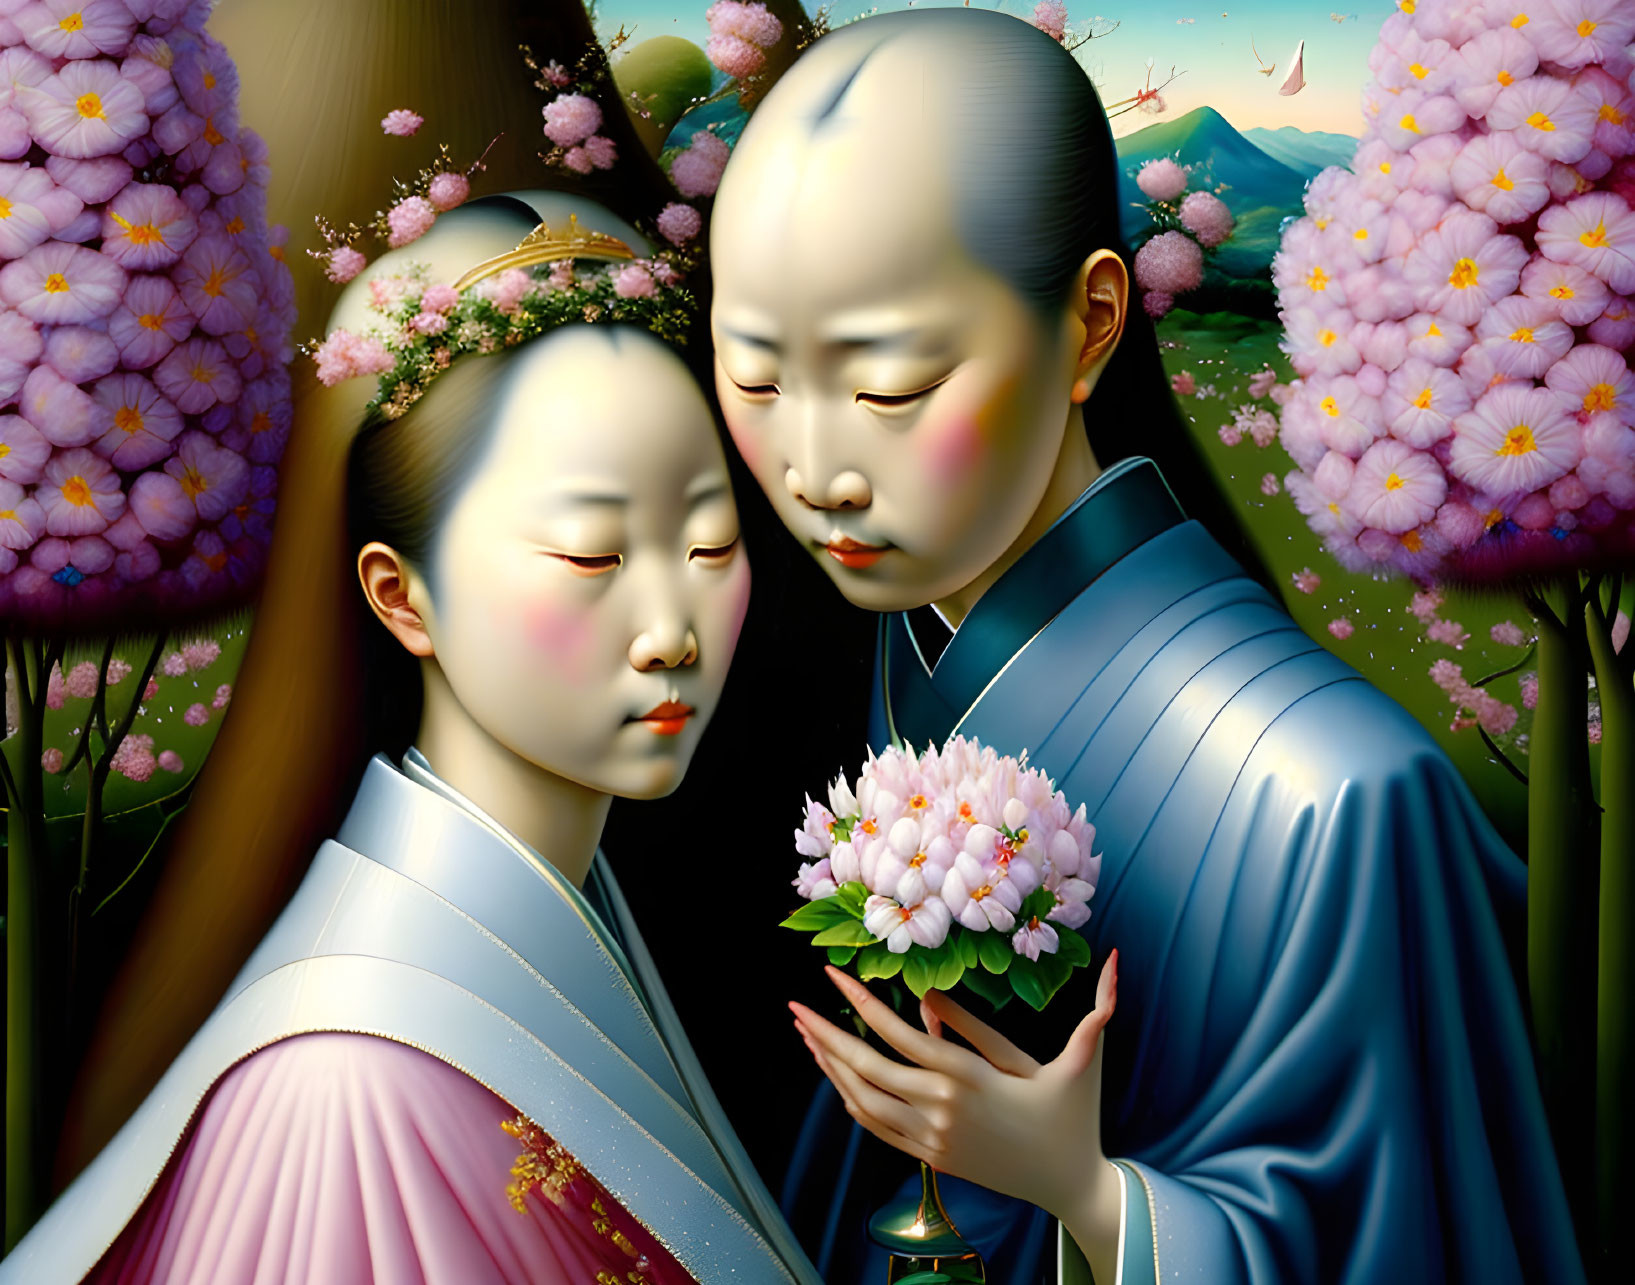 Stylized Asian figures in traditional attire with pink flowers